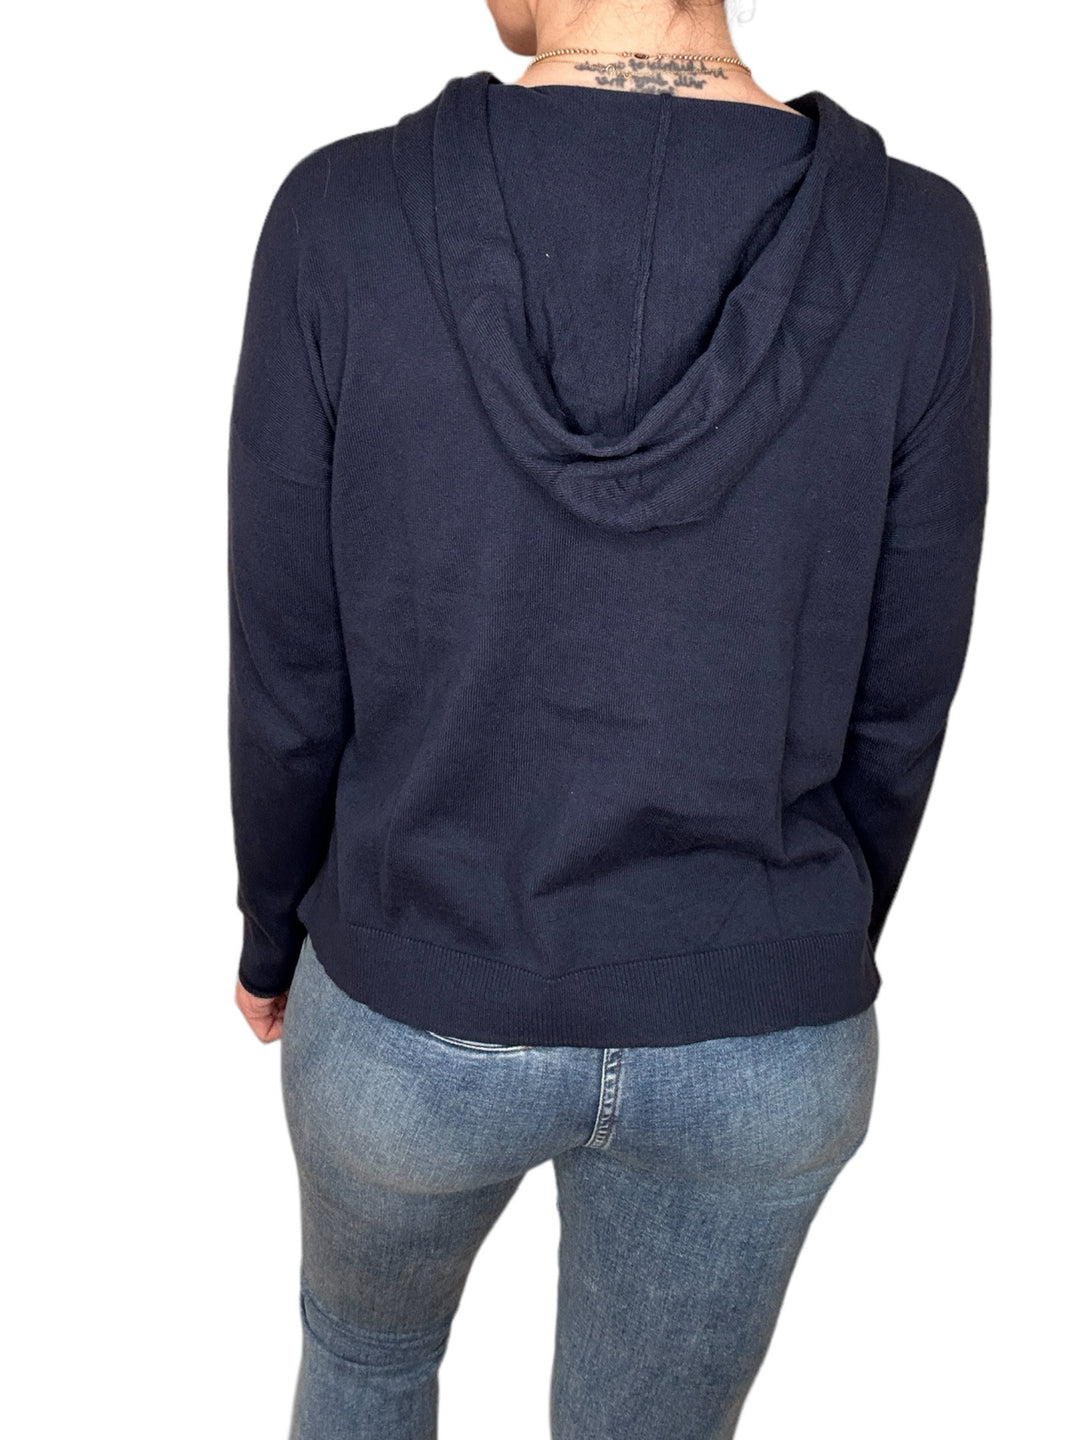 DAISY HOODIE-NAVY - Kingfisher Road - Online Boutique